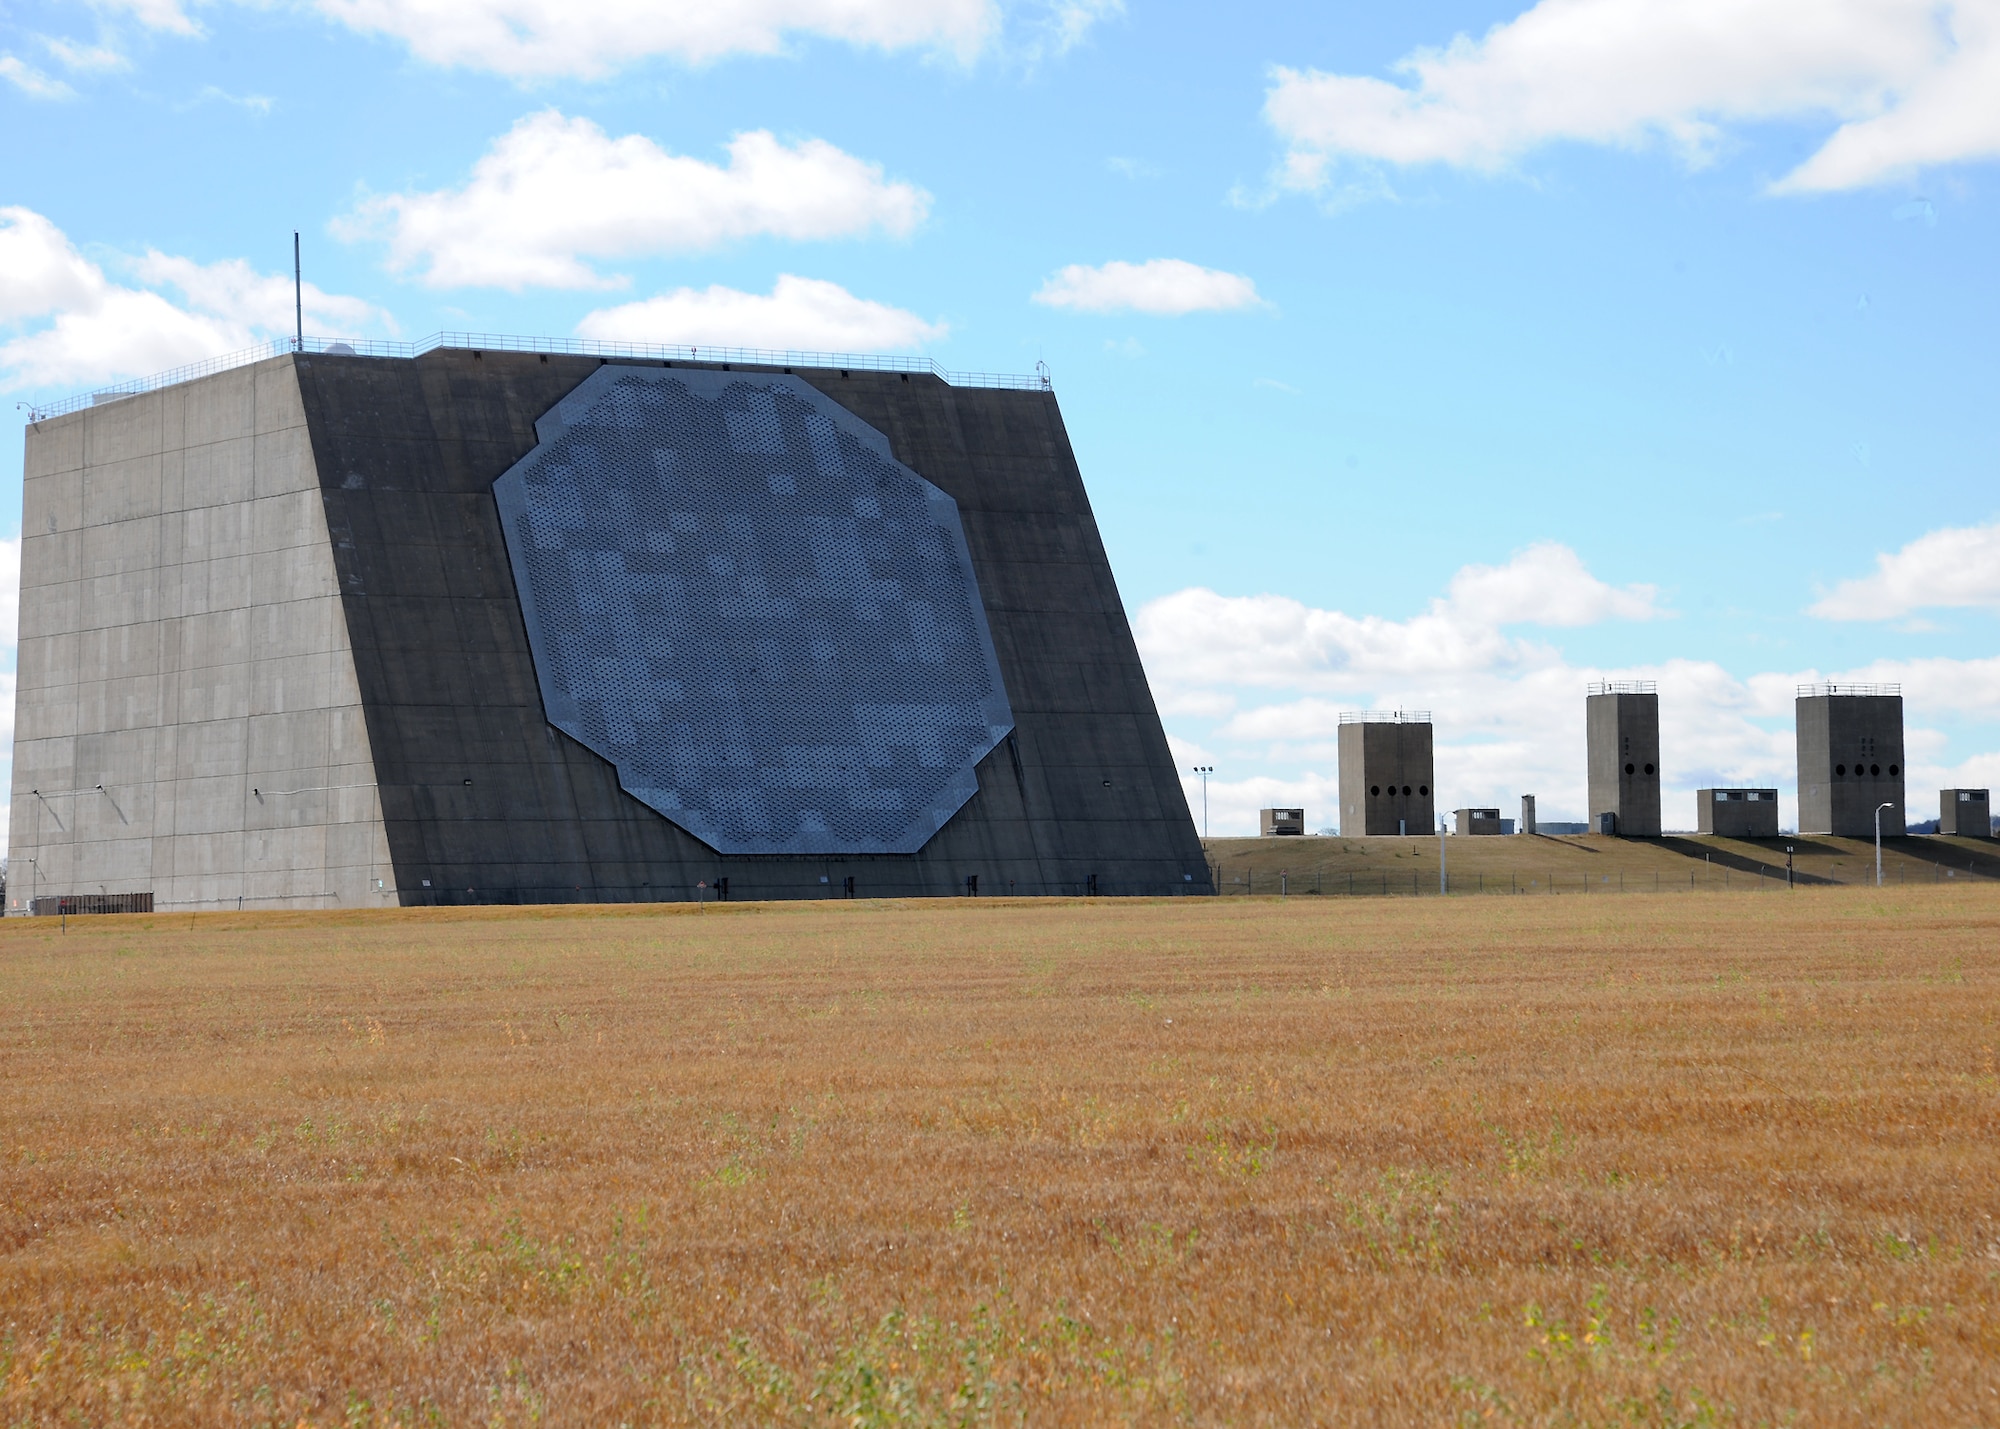 A full view of the Perimeter Acquisition Radar building located at Cavalier Air Force Station in North Dakota. The building houses the Perimeter Acquisition Radar Attack Characterization System, a key piece of the national military command system.